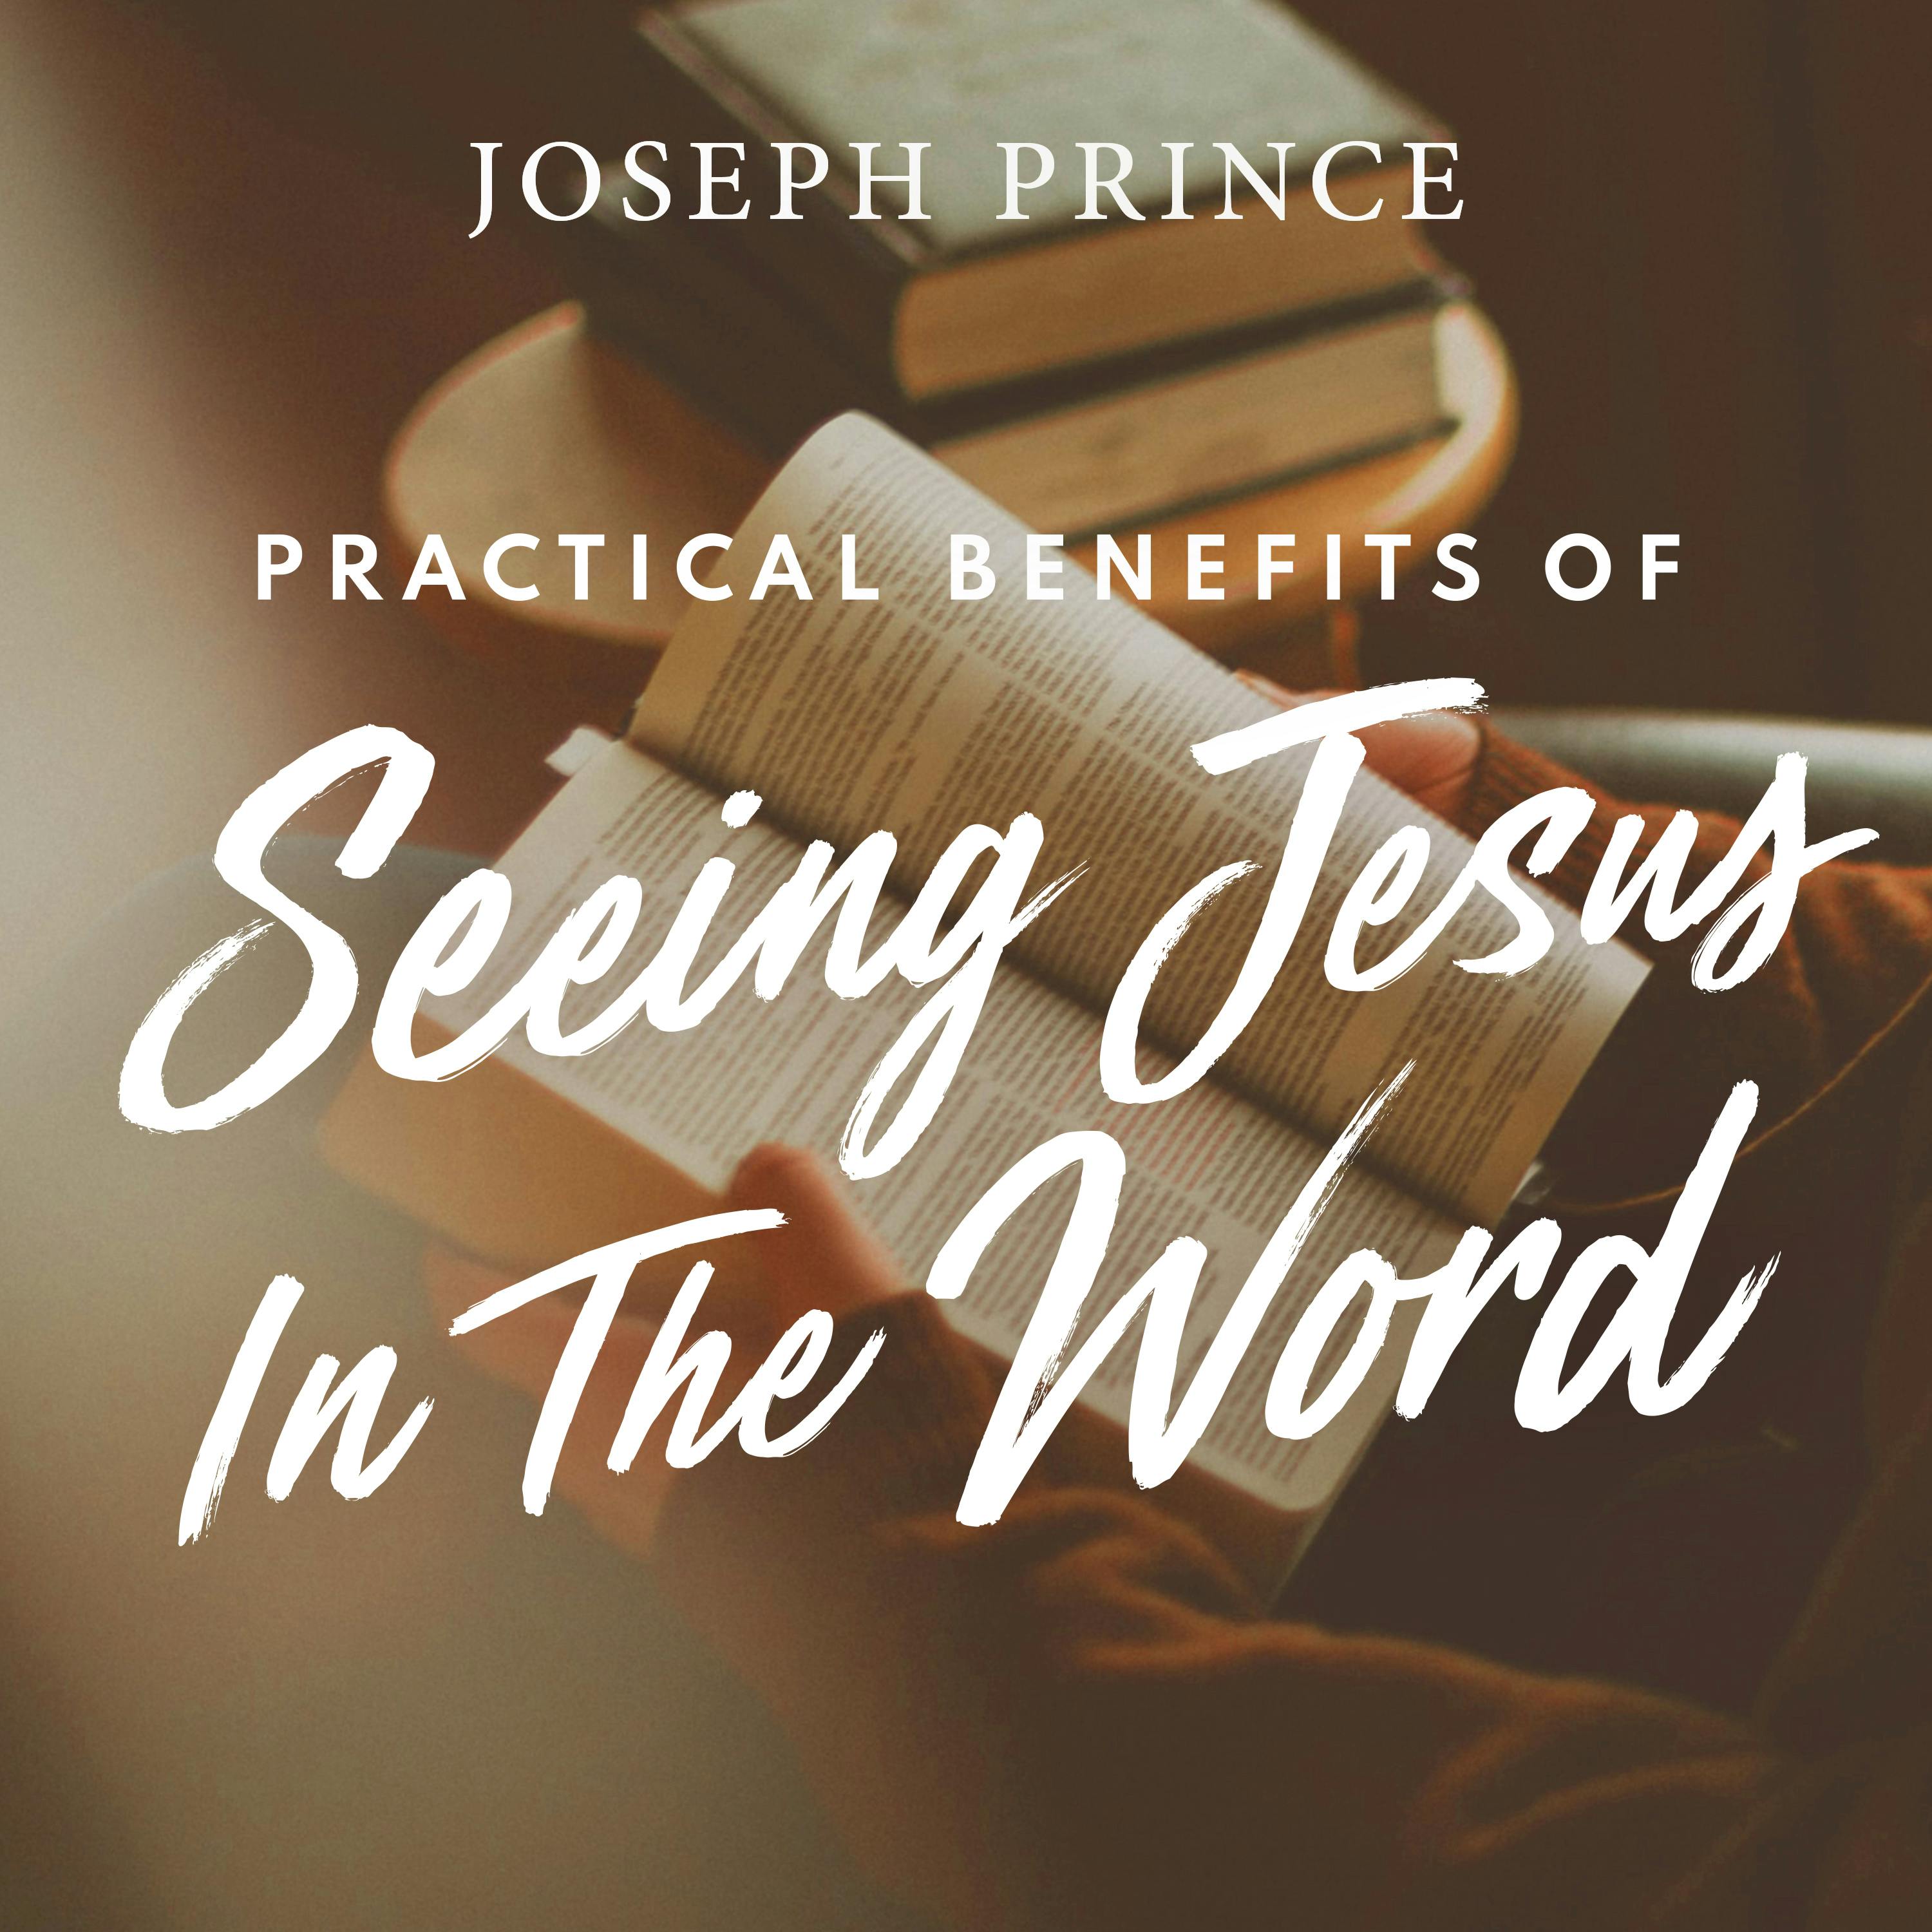 Practical Benefits of Seeing Jesus in the Word | Official Joseph